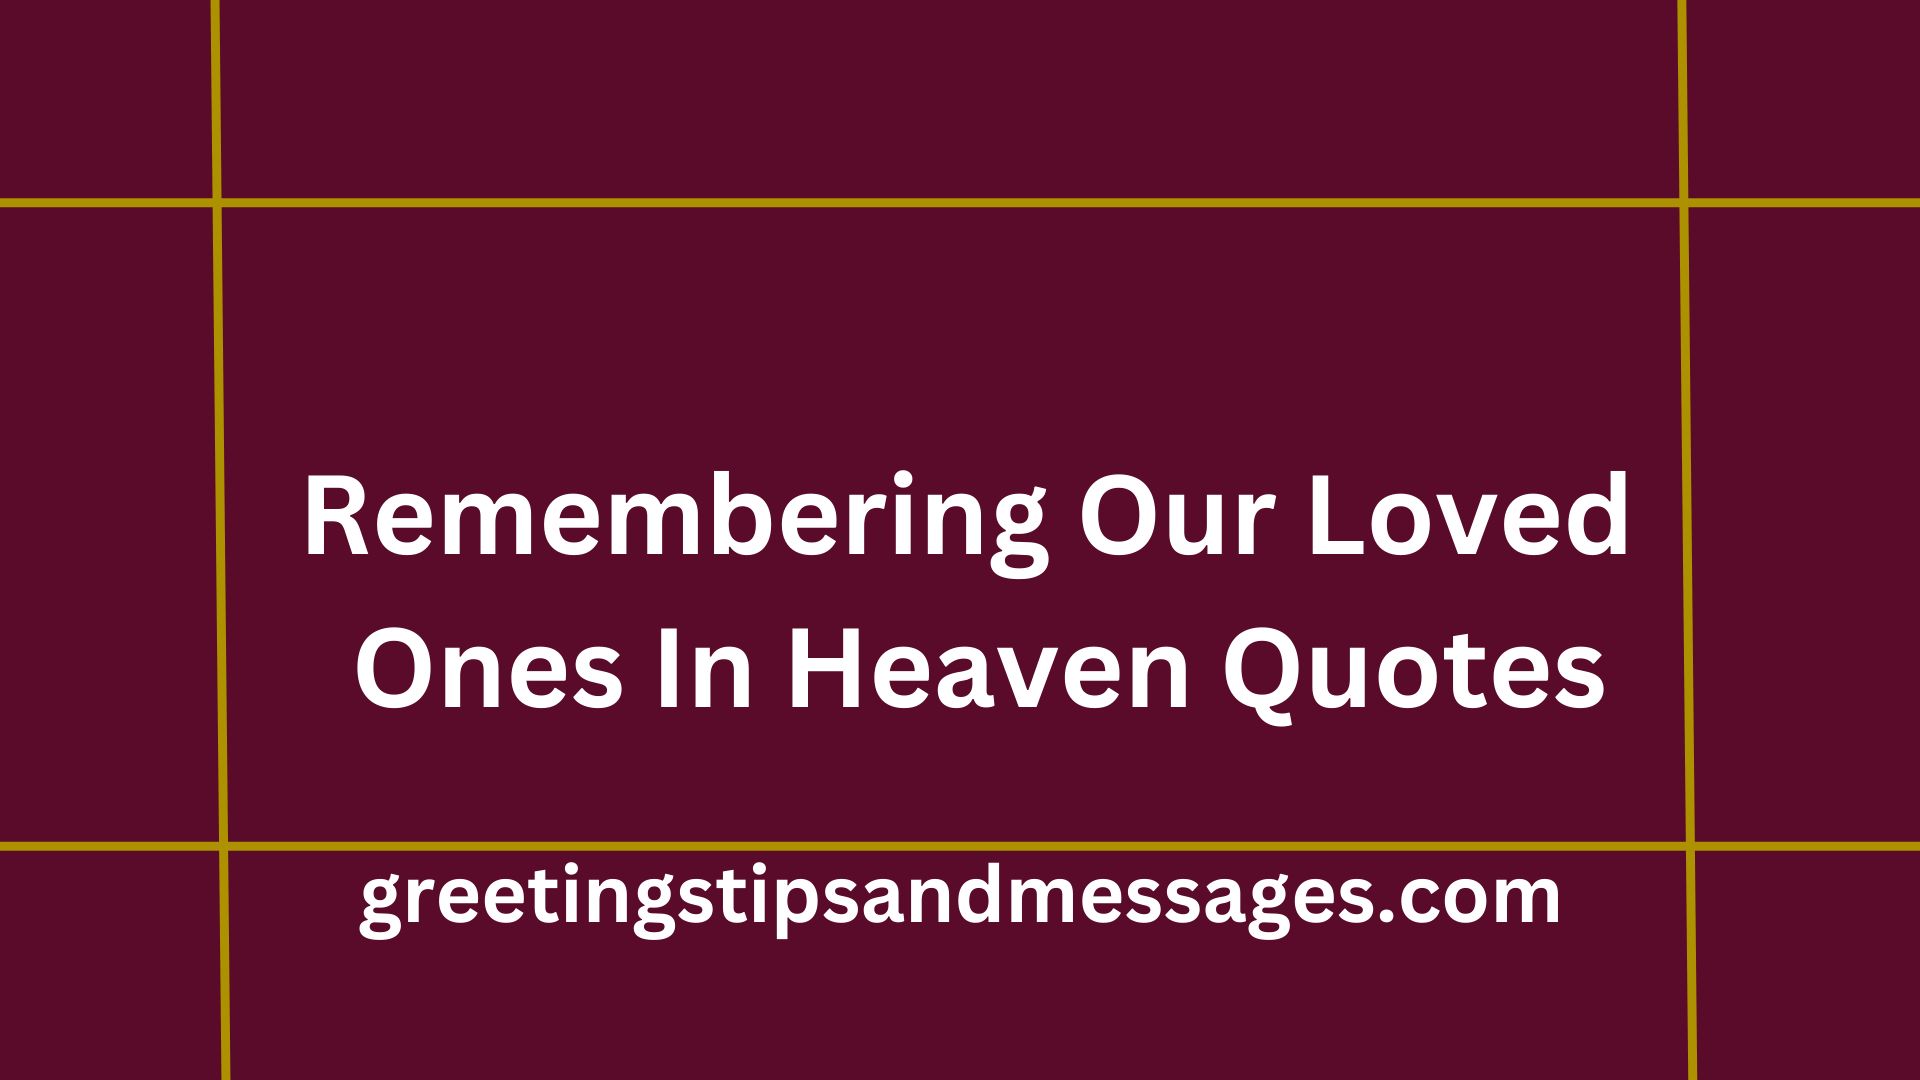 Remembering Our Loved Ones In Heaven Quotes